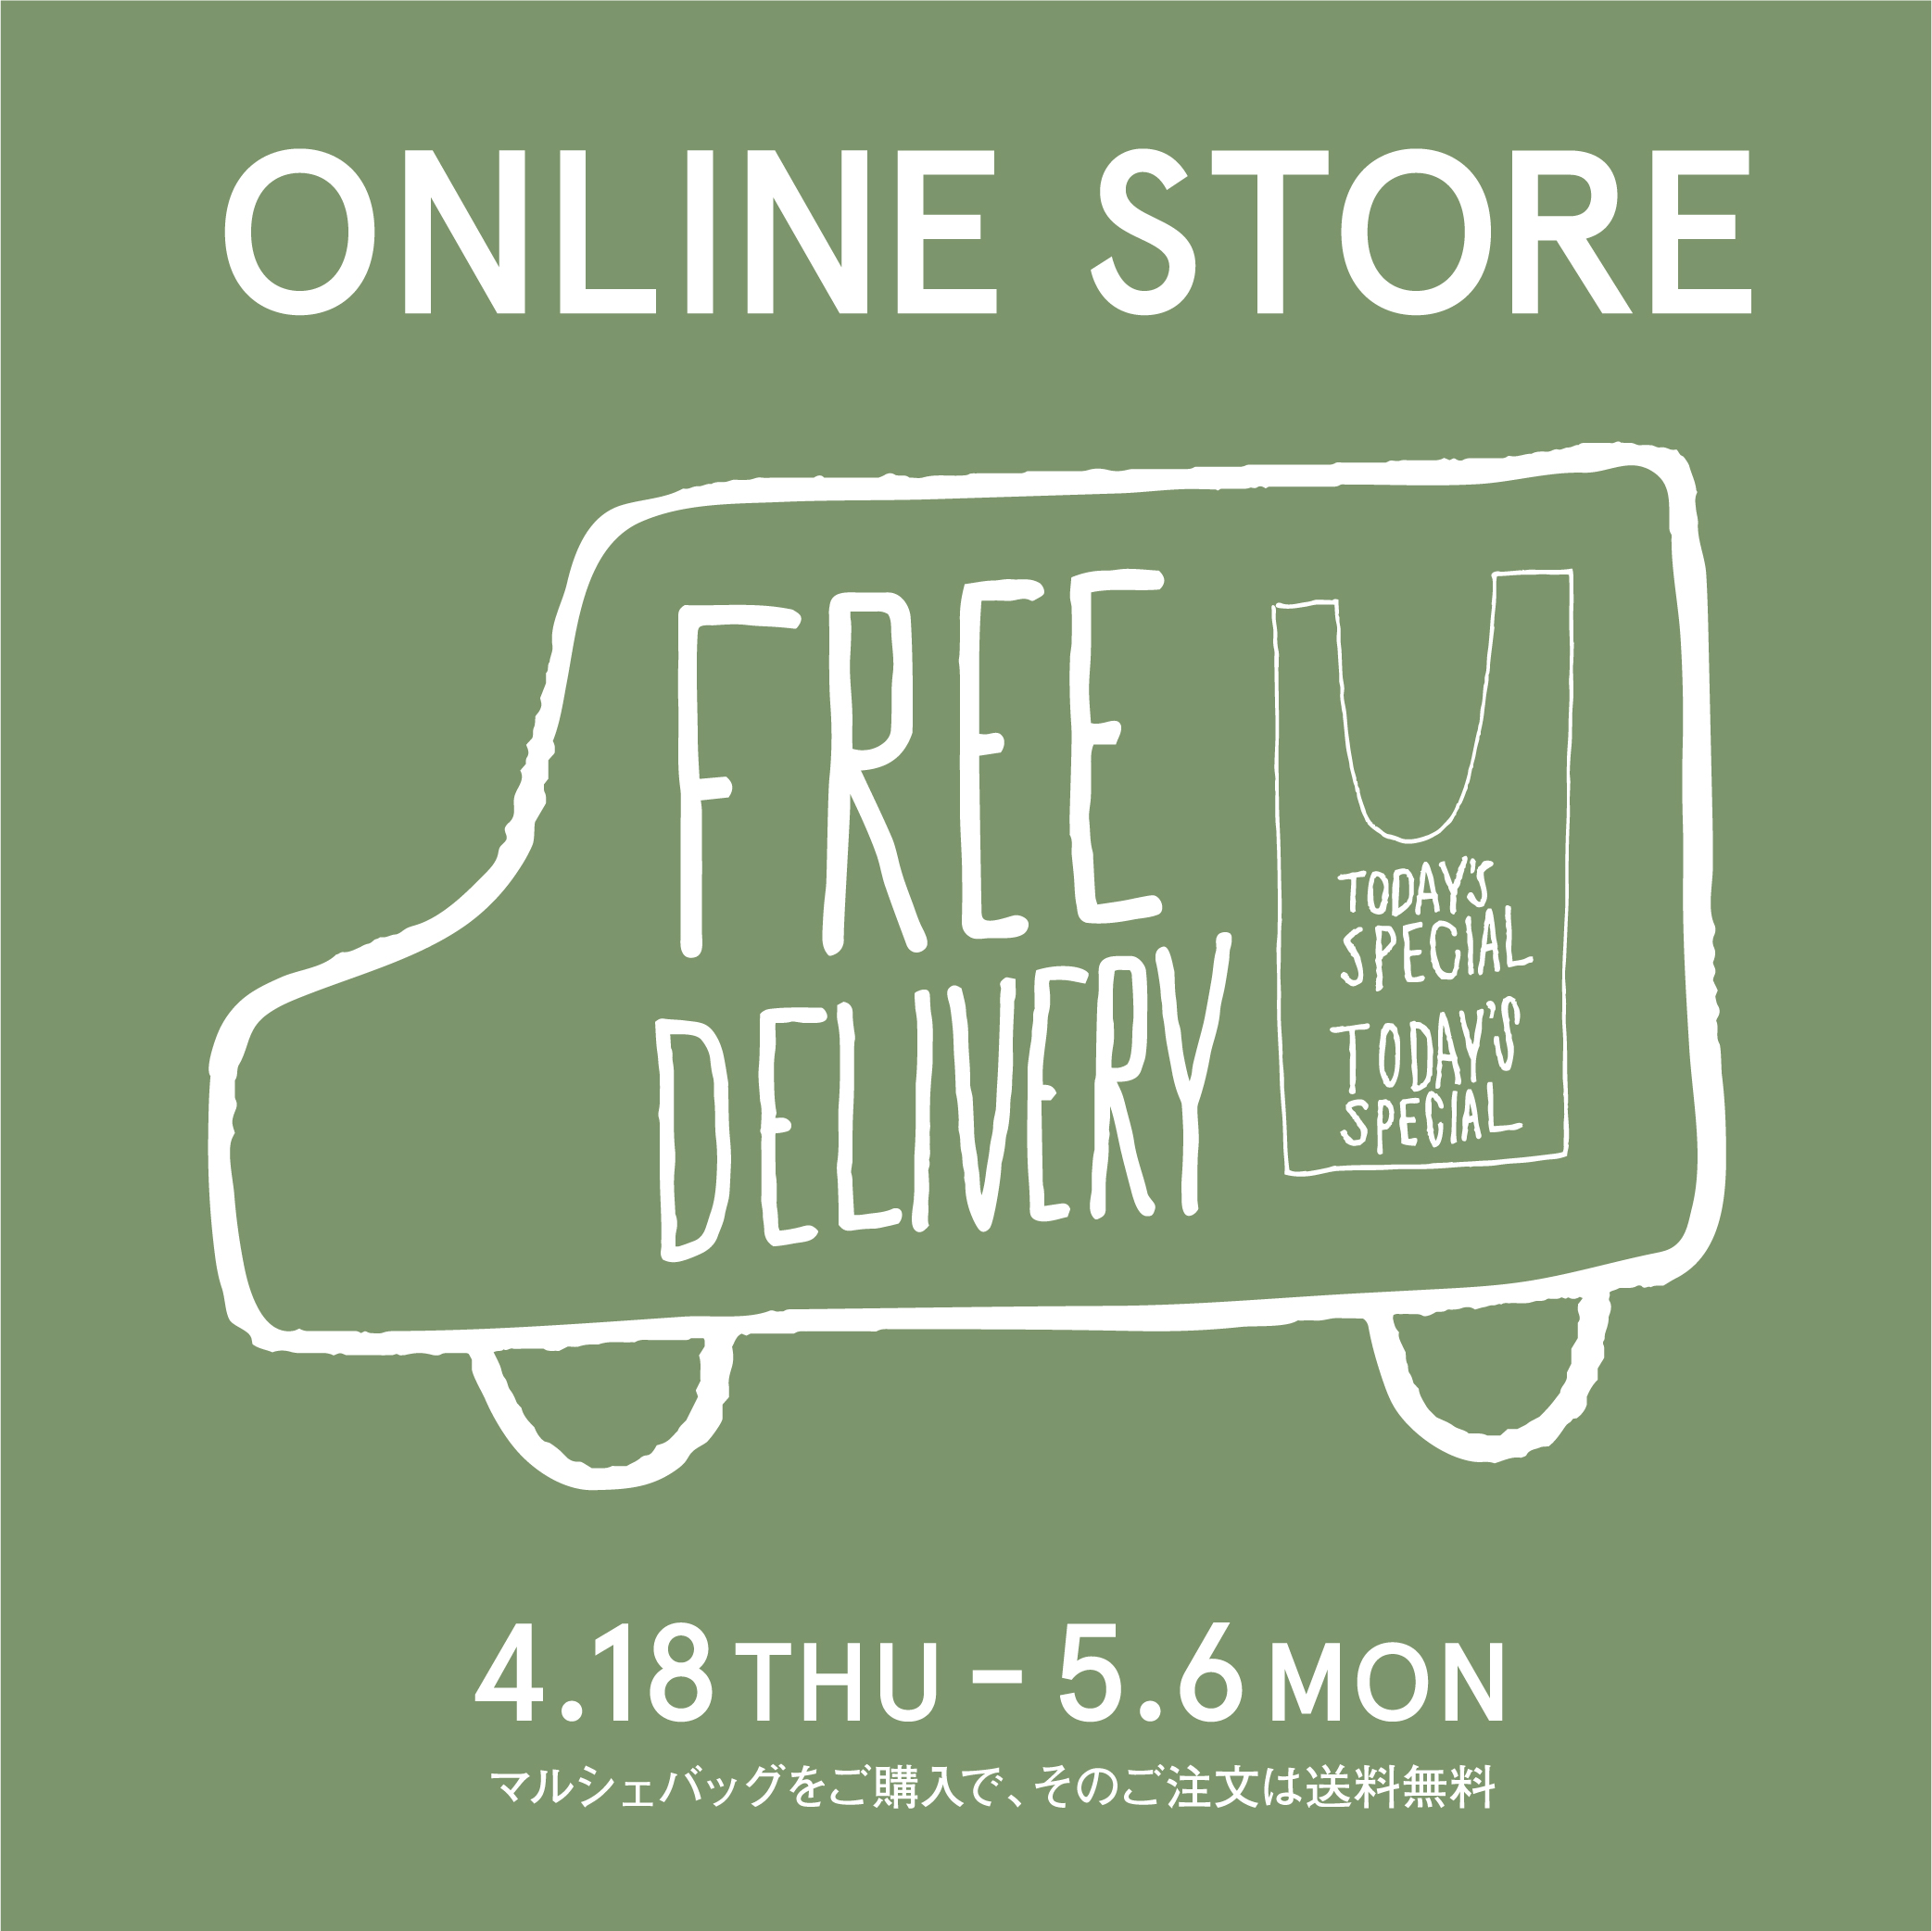 【ONLINE STORE】 MARCHE BAG 送料無料キャンペーン　4/18～